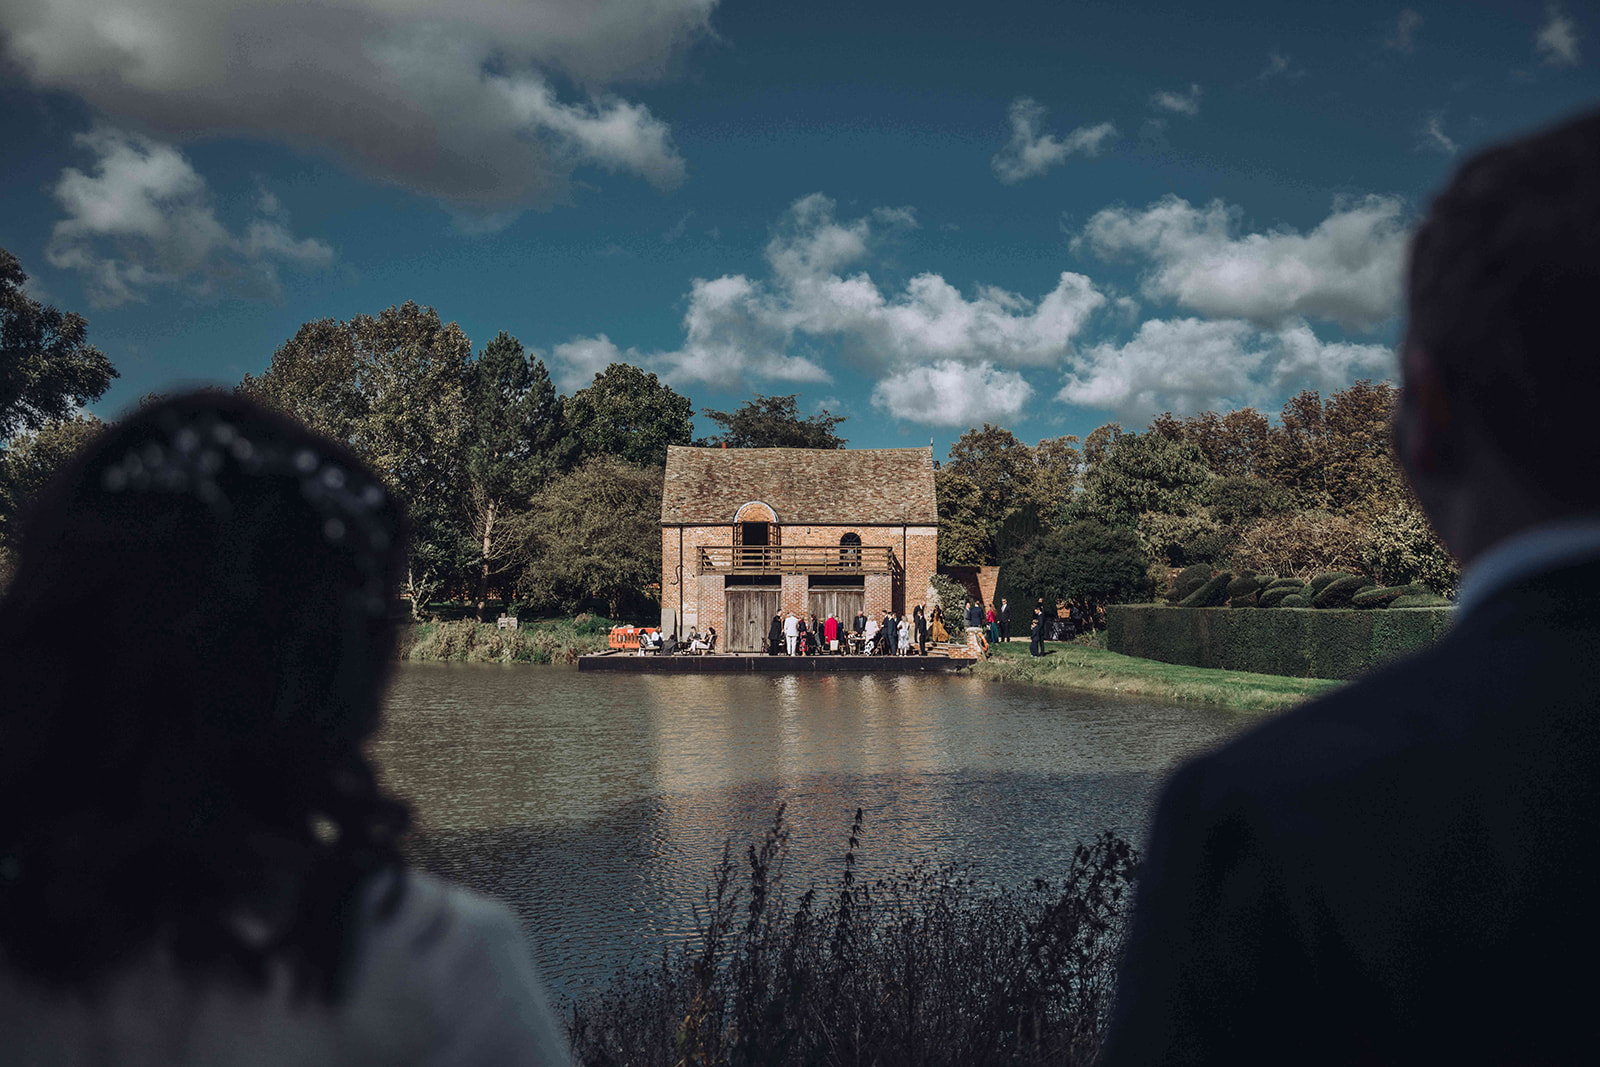 A shot across the pond at Childerley wedding venue in Cambridge